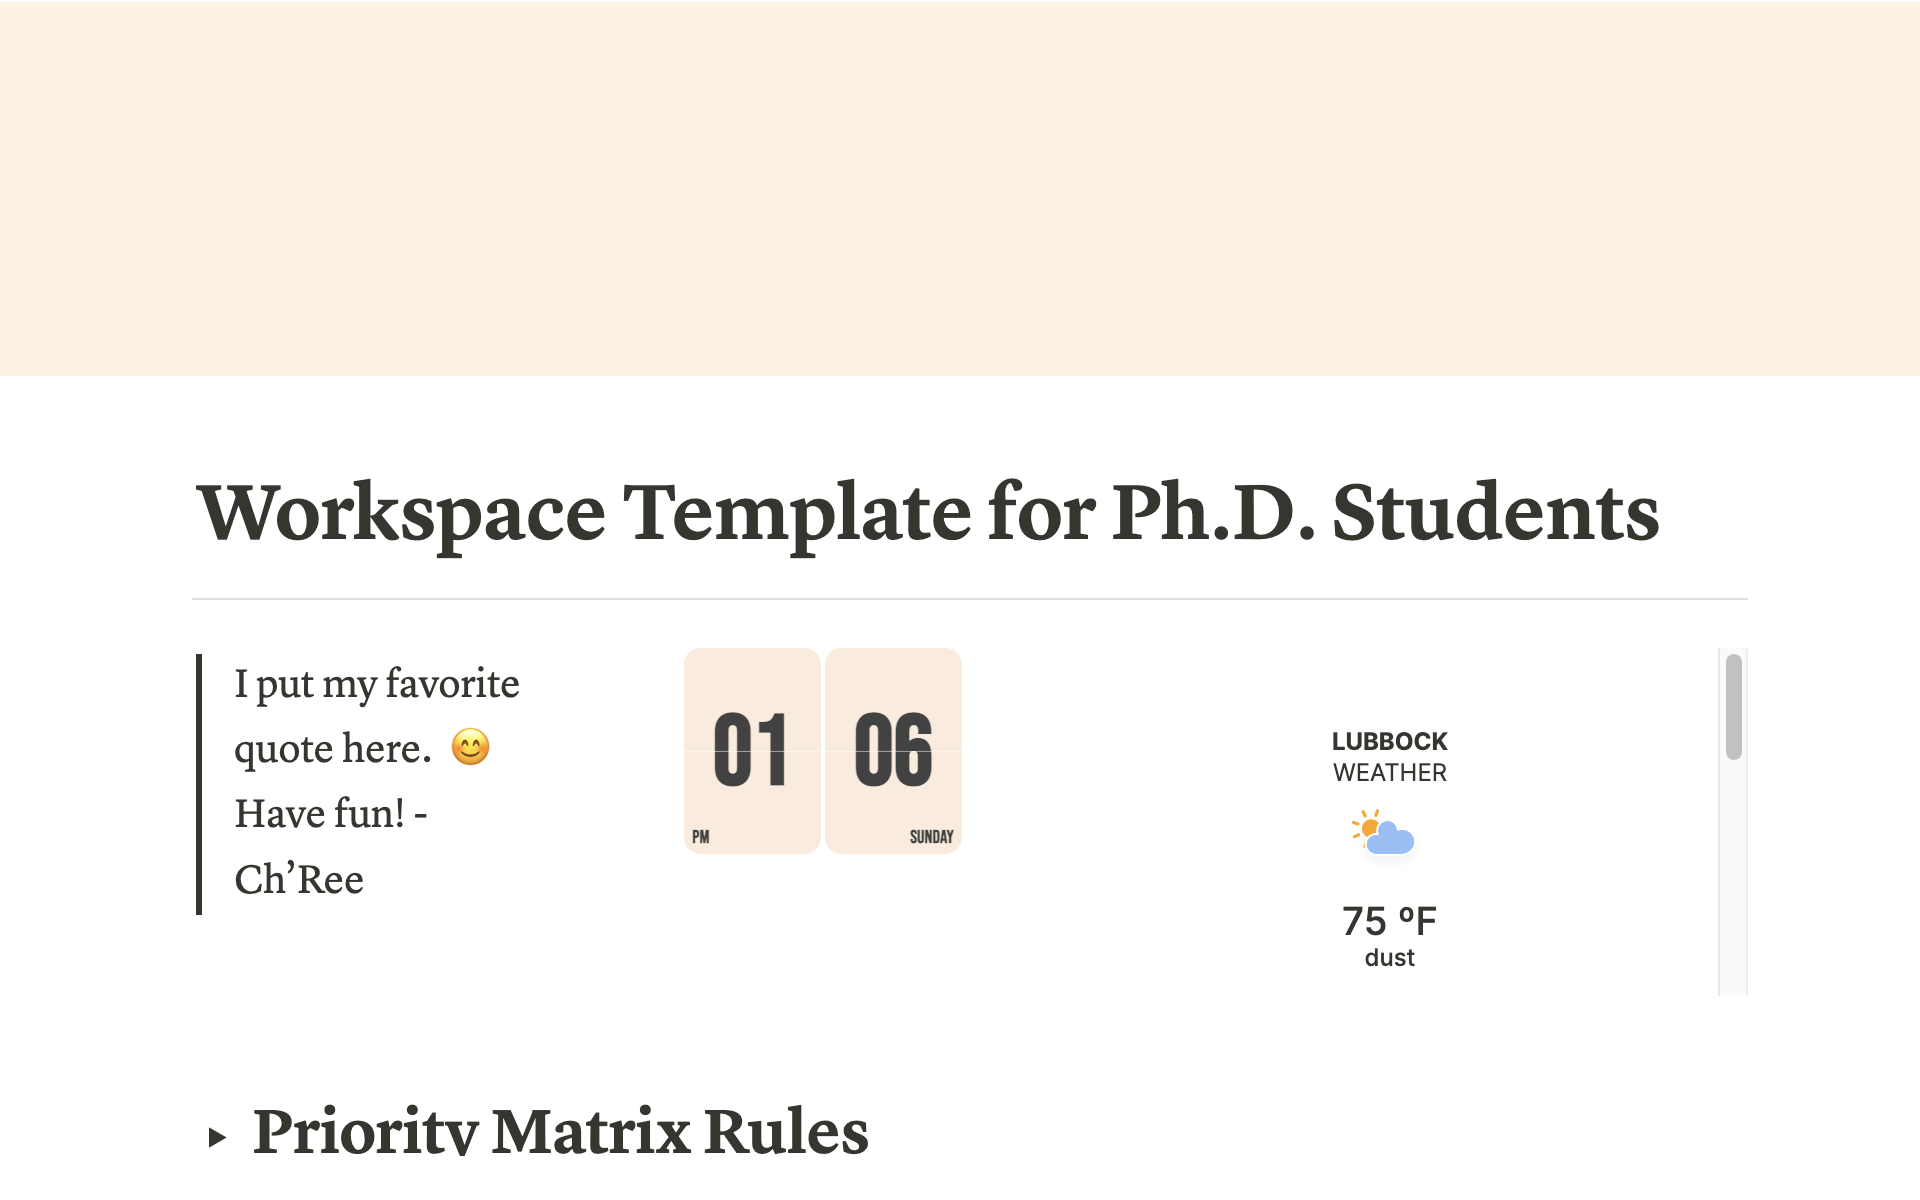 The primary aim of this template is to help the average Ph.D. student organize the different sects of their academic life, breaking up tasks into four categories: Research, Coursework, Teaching, and Personal/Service.